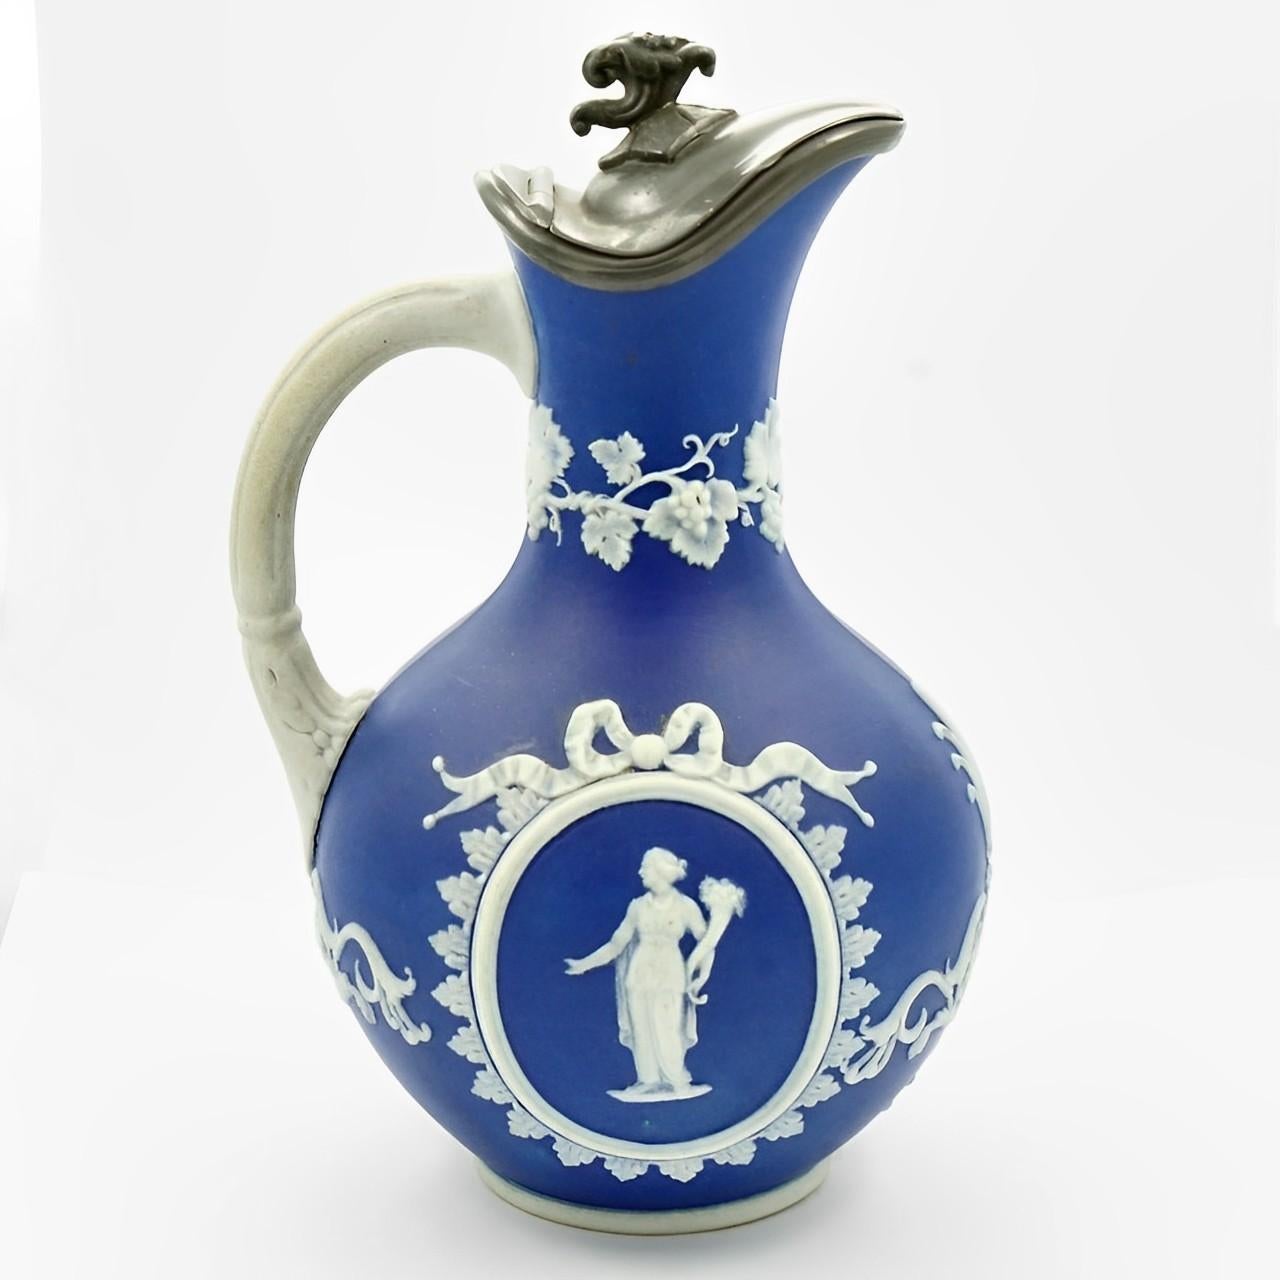 Beautiful antique Victorian dark cobalt blue jug with a pewter lid. Featuring classical relief figures and a grapevine edging. Measuring height 16.5 cm / 6.5 inches, and approximately diameter 9 cm / 3.5 inches. The jug is in very good condition for